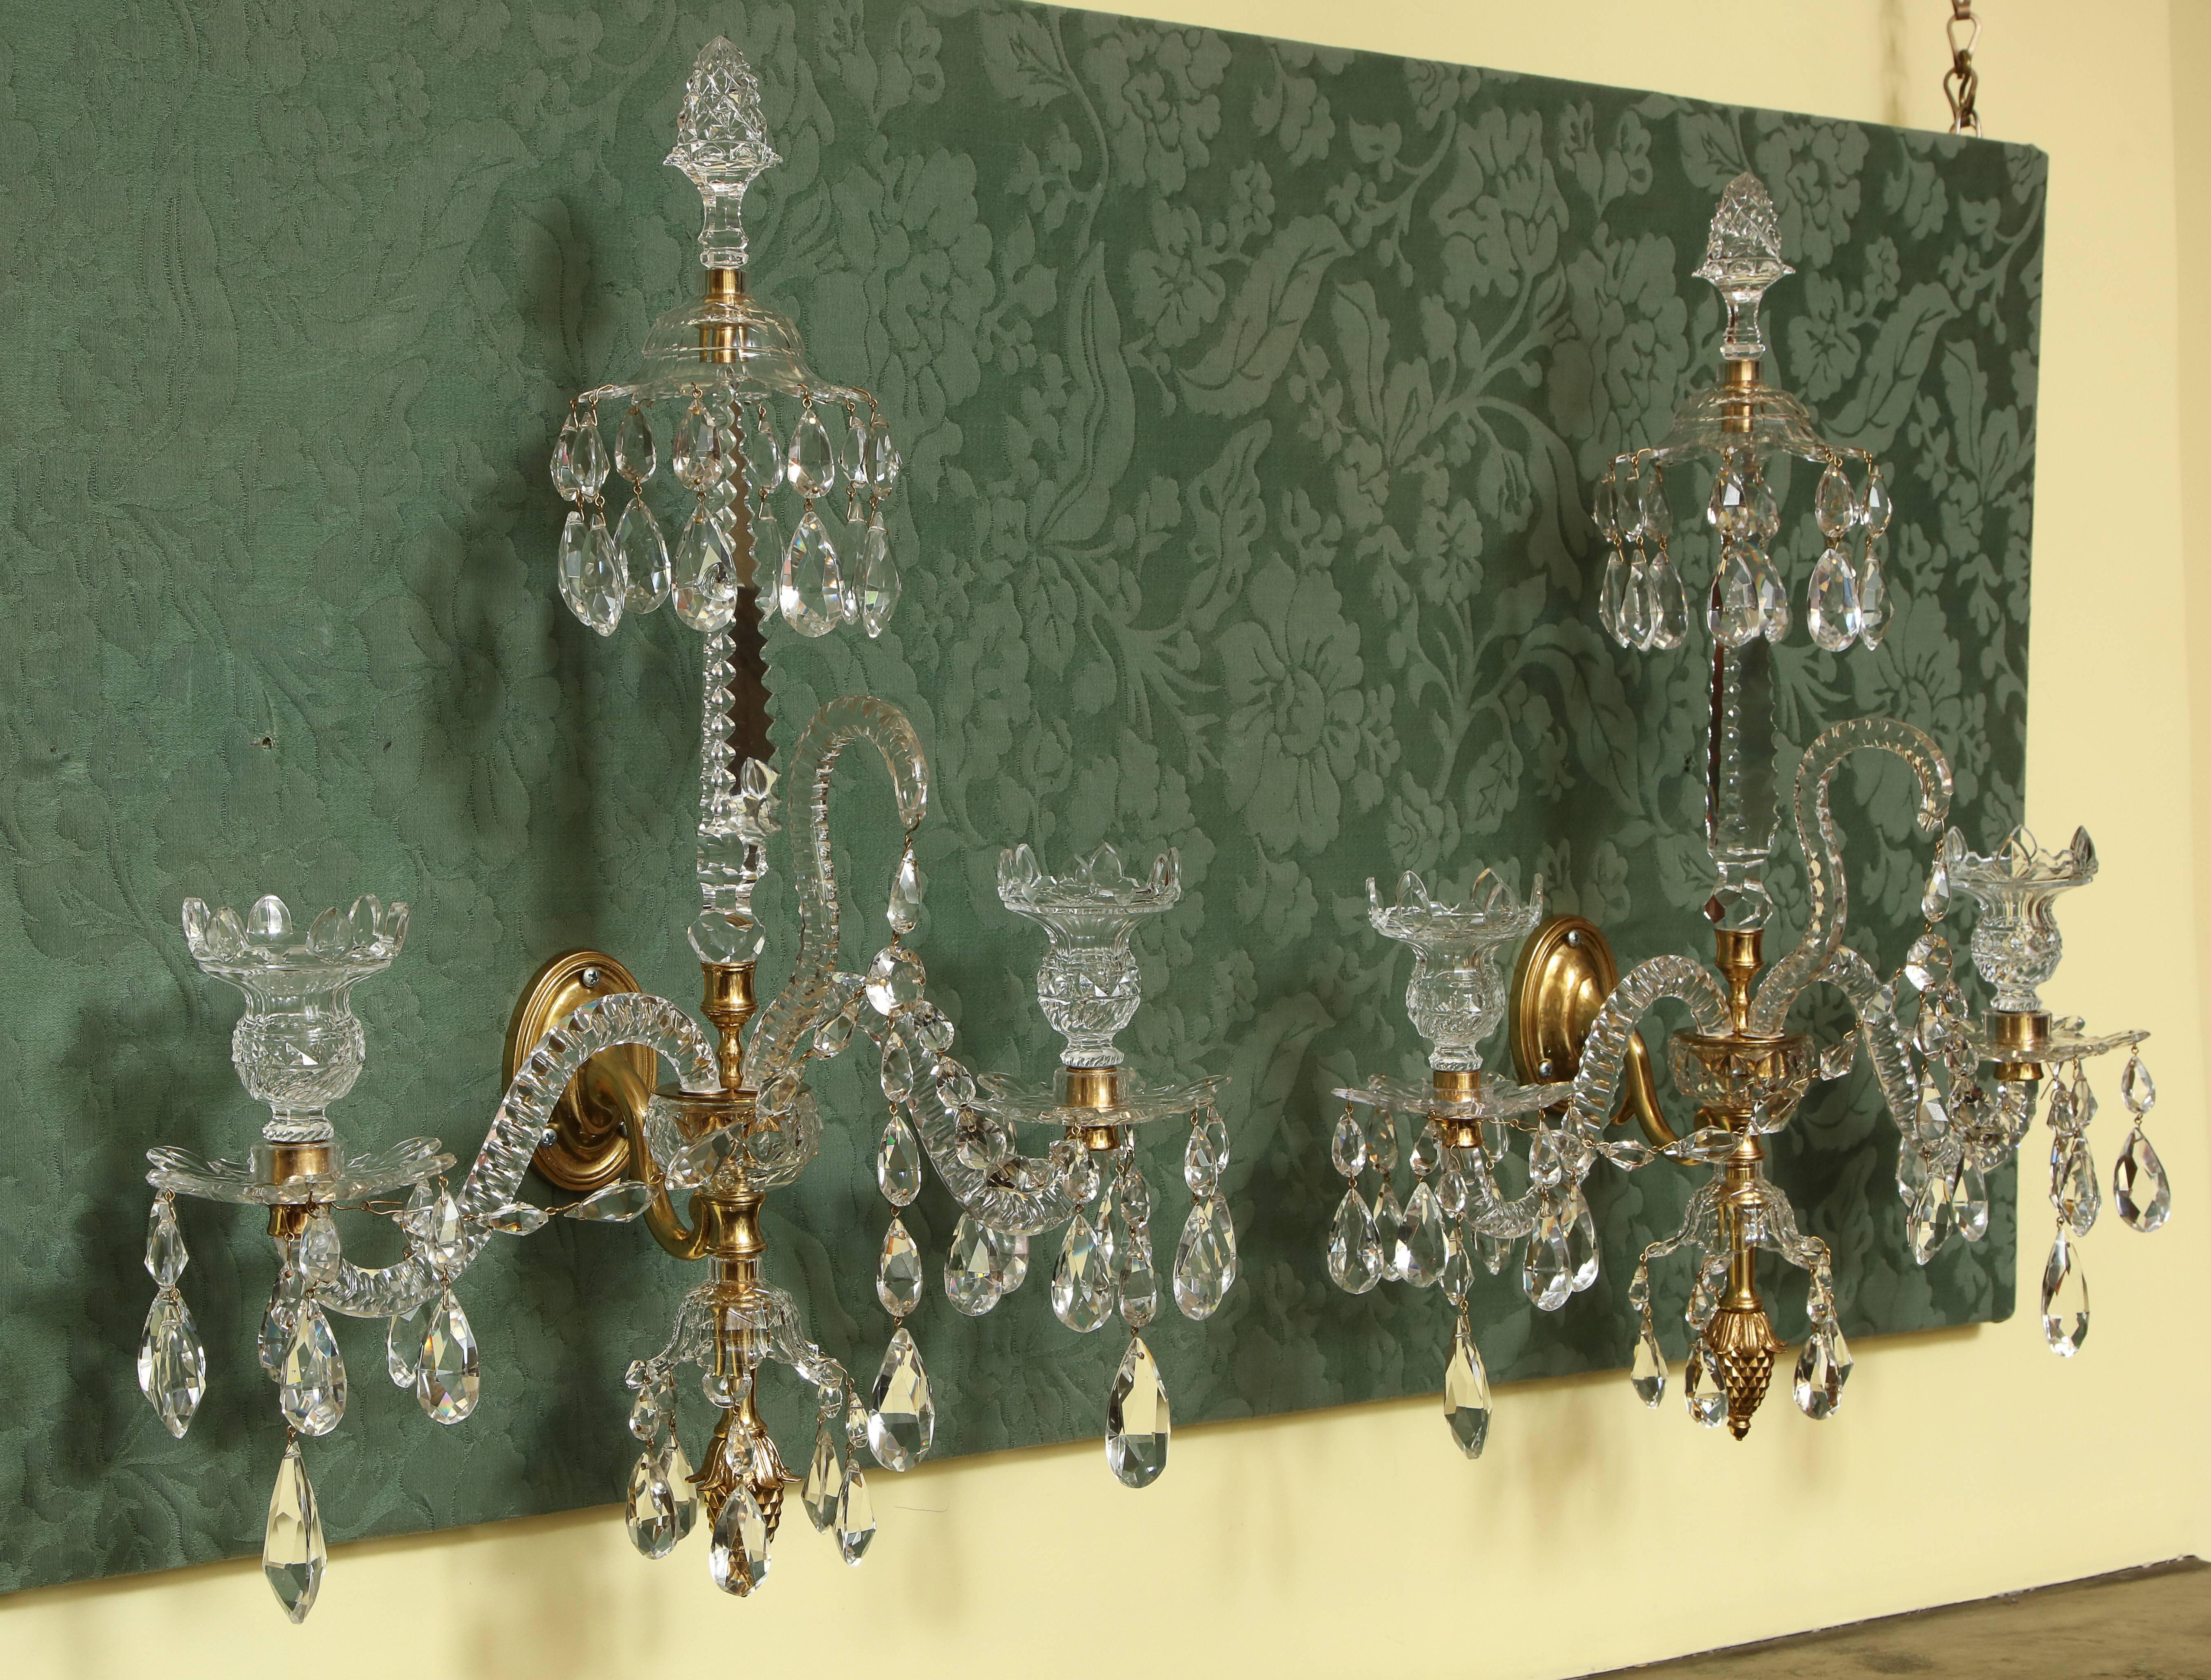 Very fFne Pair of Adam Period Cut Crystal and Ormolu Two Light Wall Sconces, having a crystal pineapple top finial with a cut canopy with drops on a triangular notched spire, the two faceted serpentine arms with notched cups and bobeches, festooned